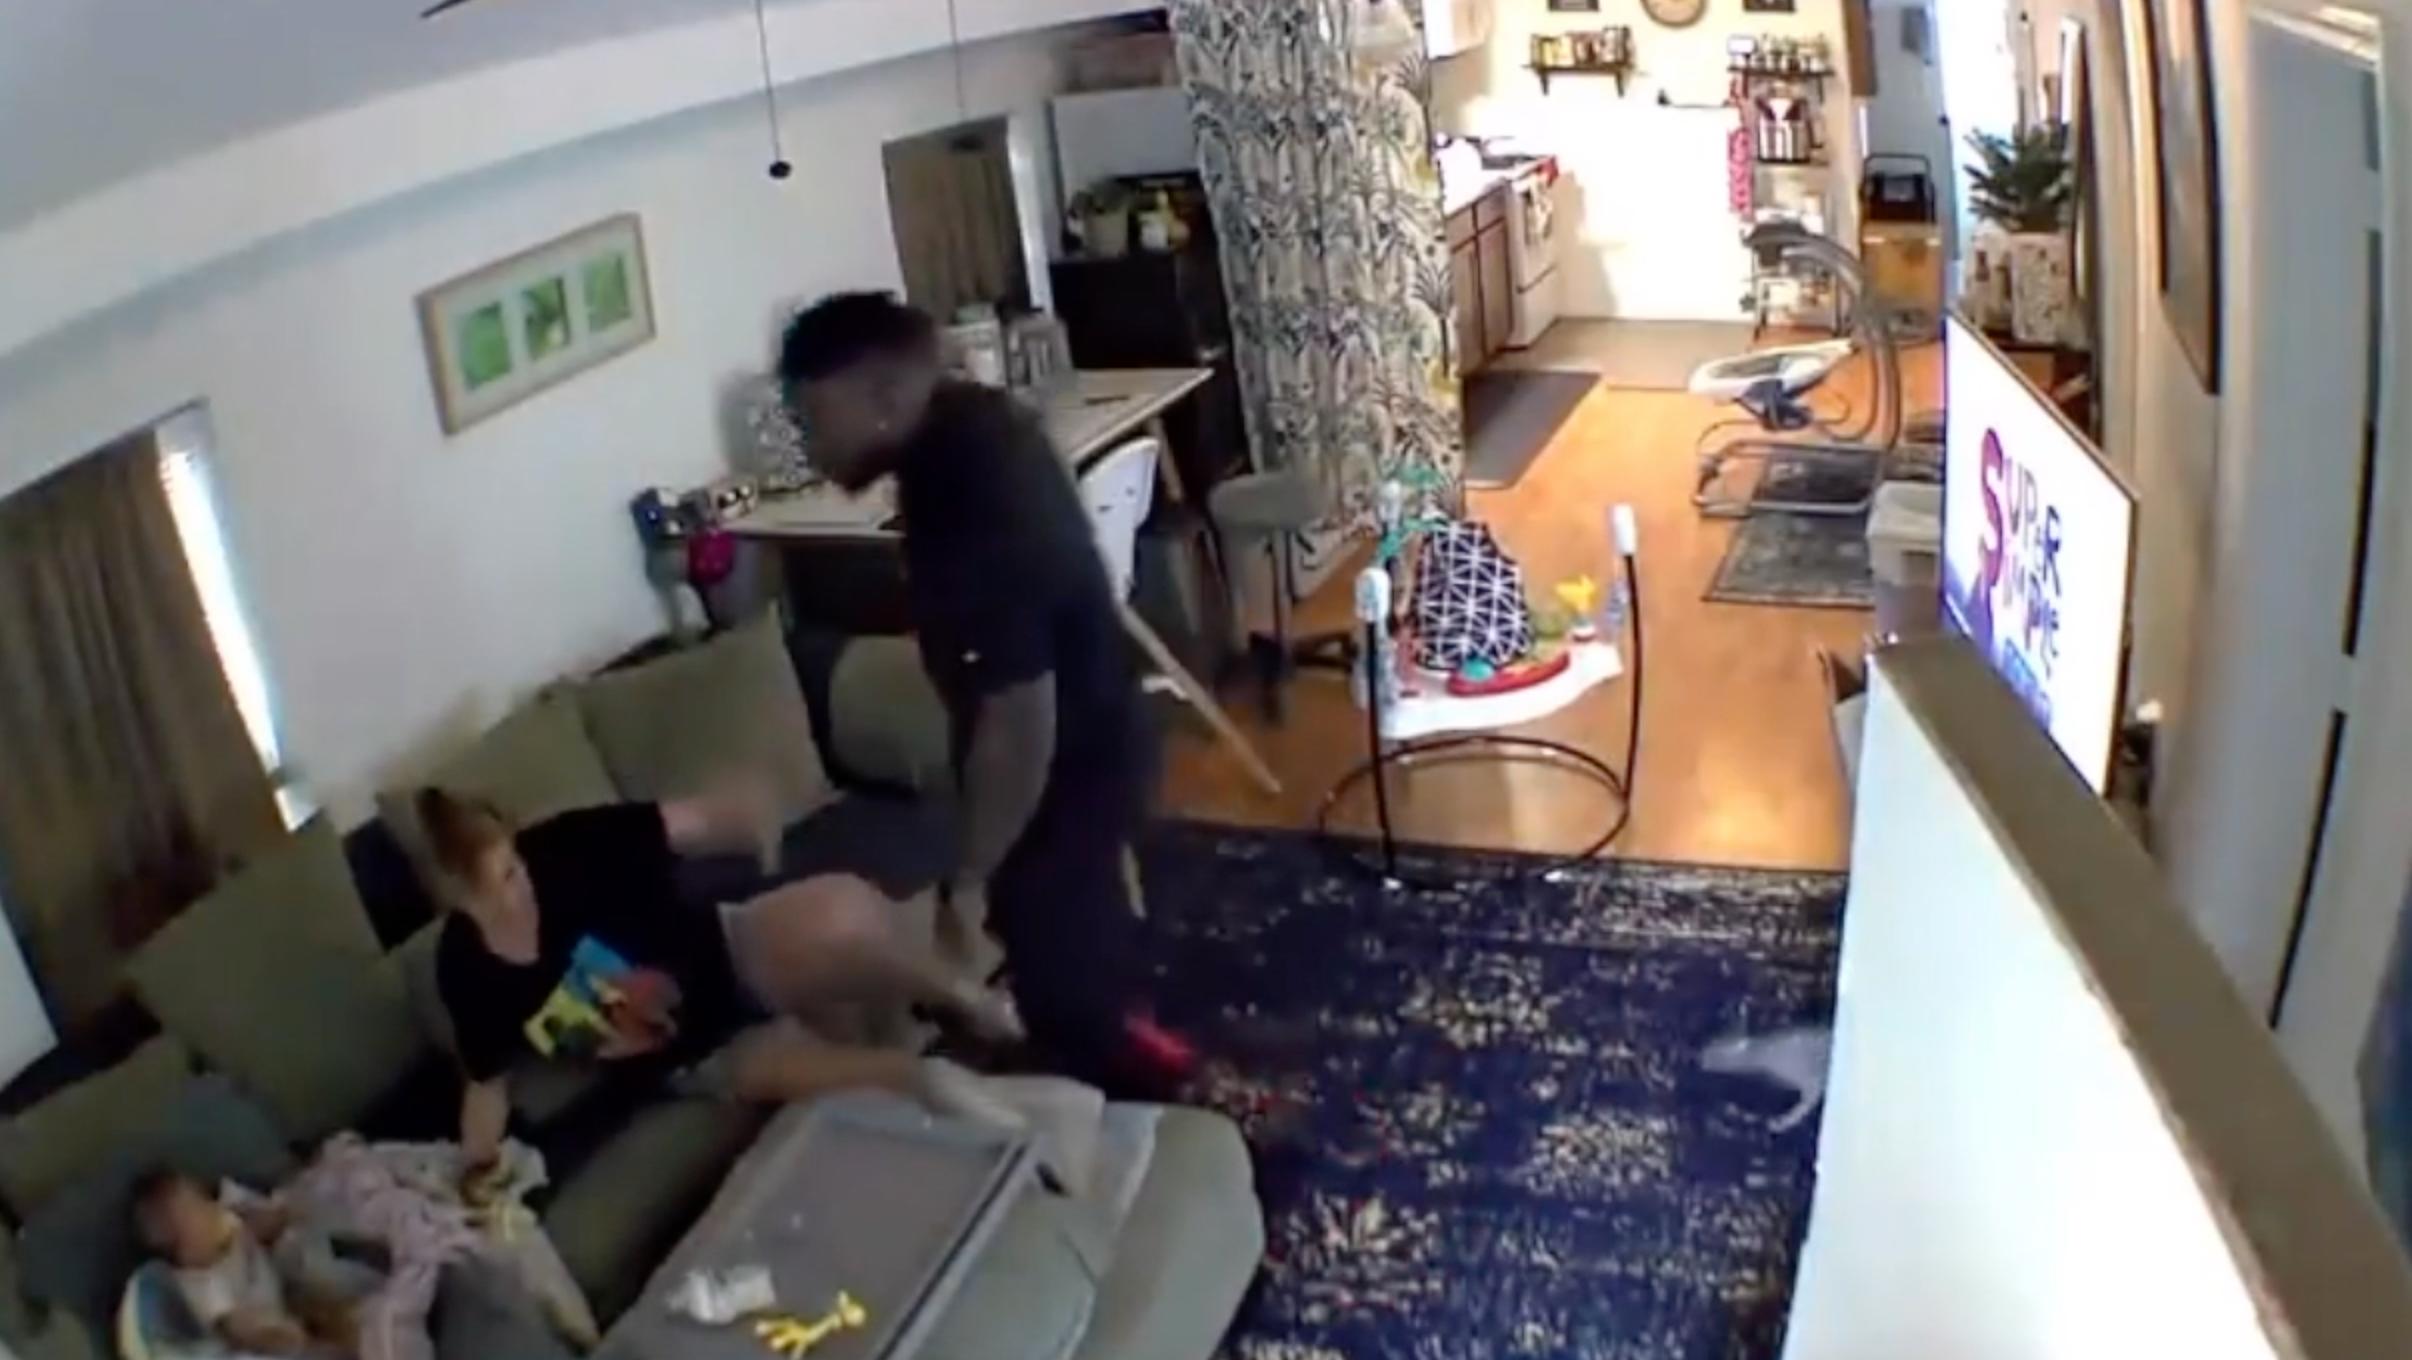 WARNING - DISTRESSING CONTENT NFL star Zac Stacy caught on camera allegedly attacking his ex